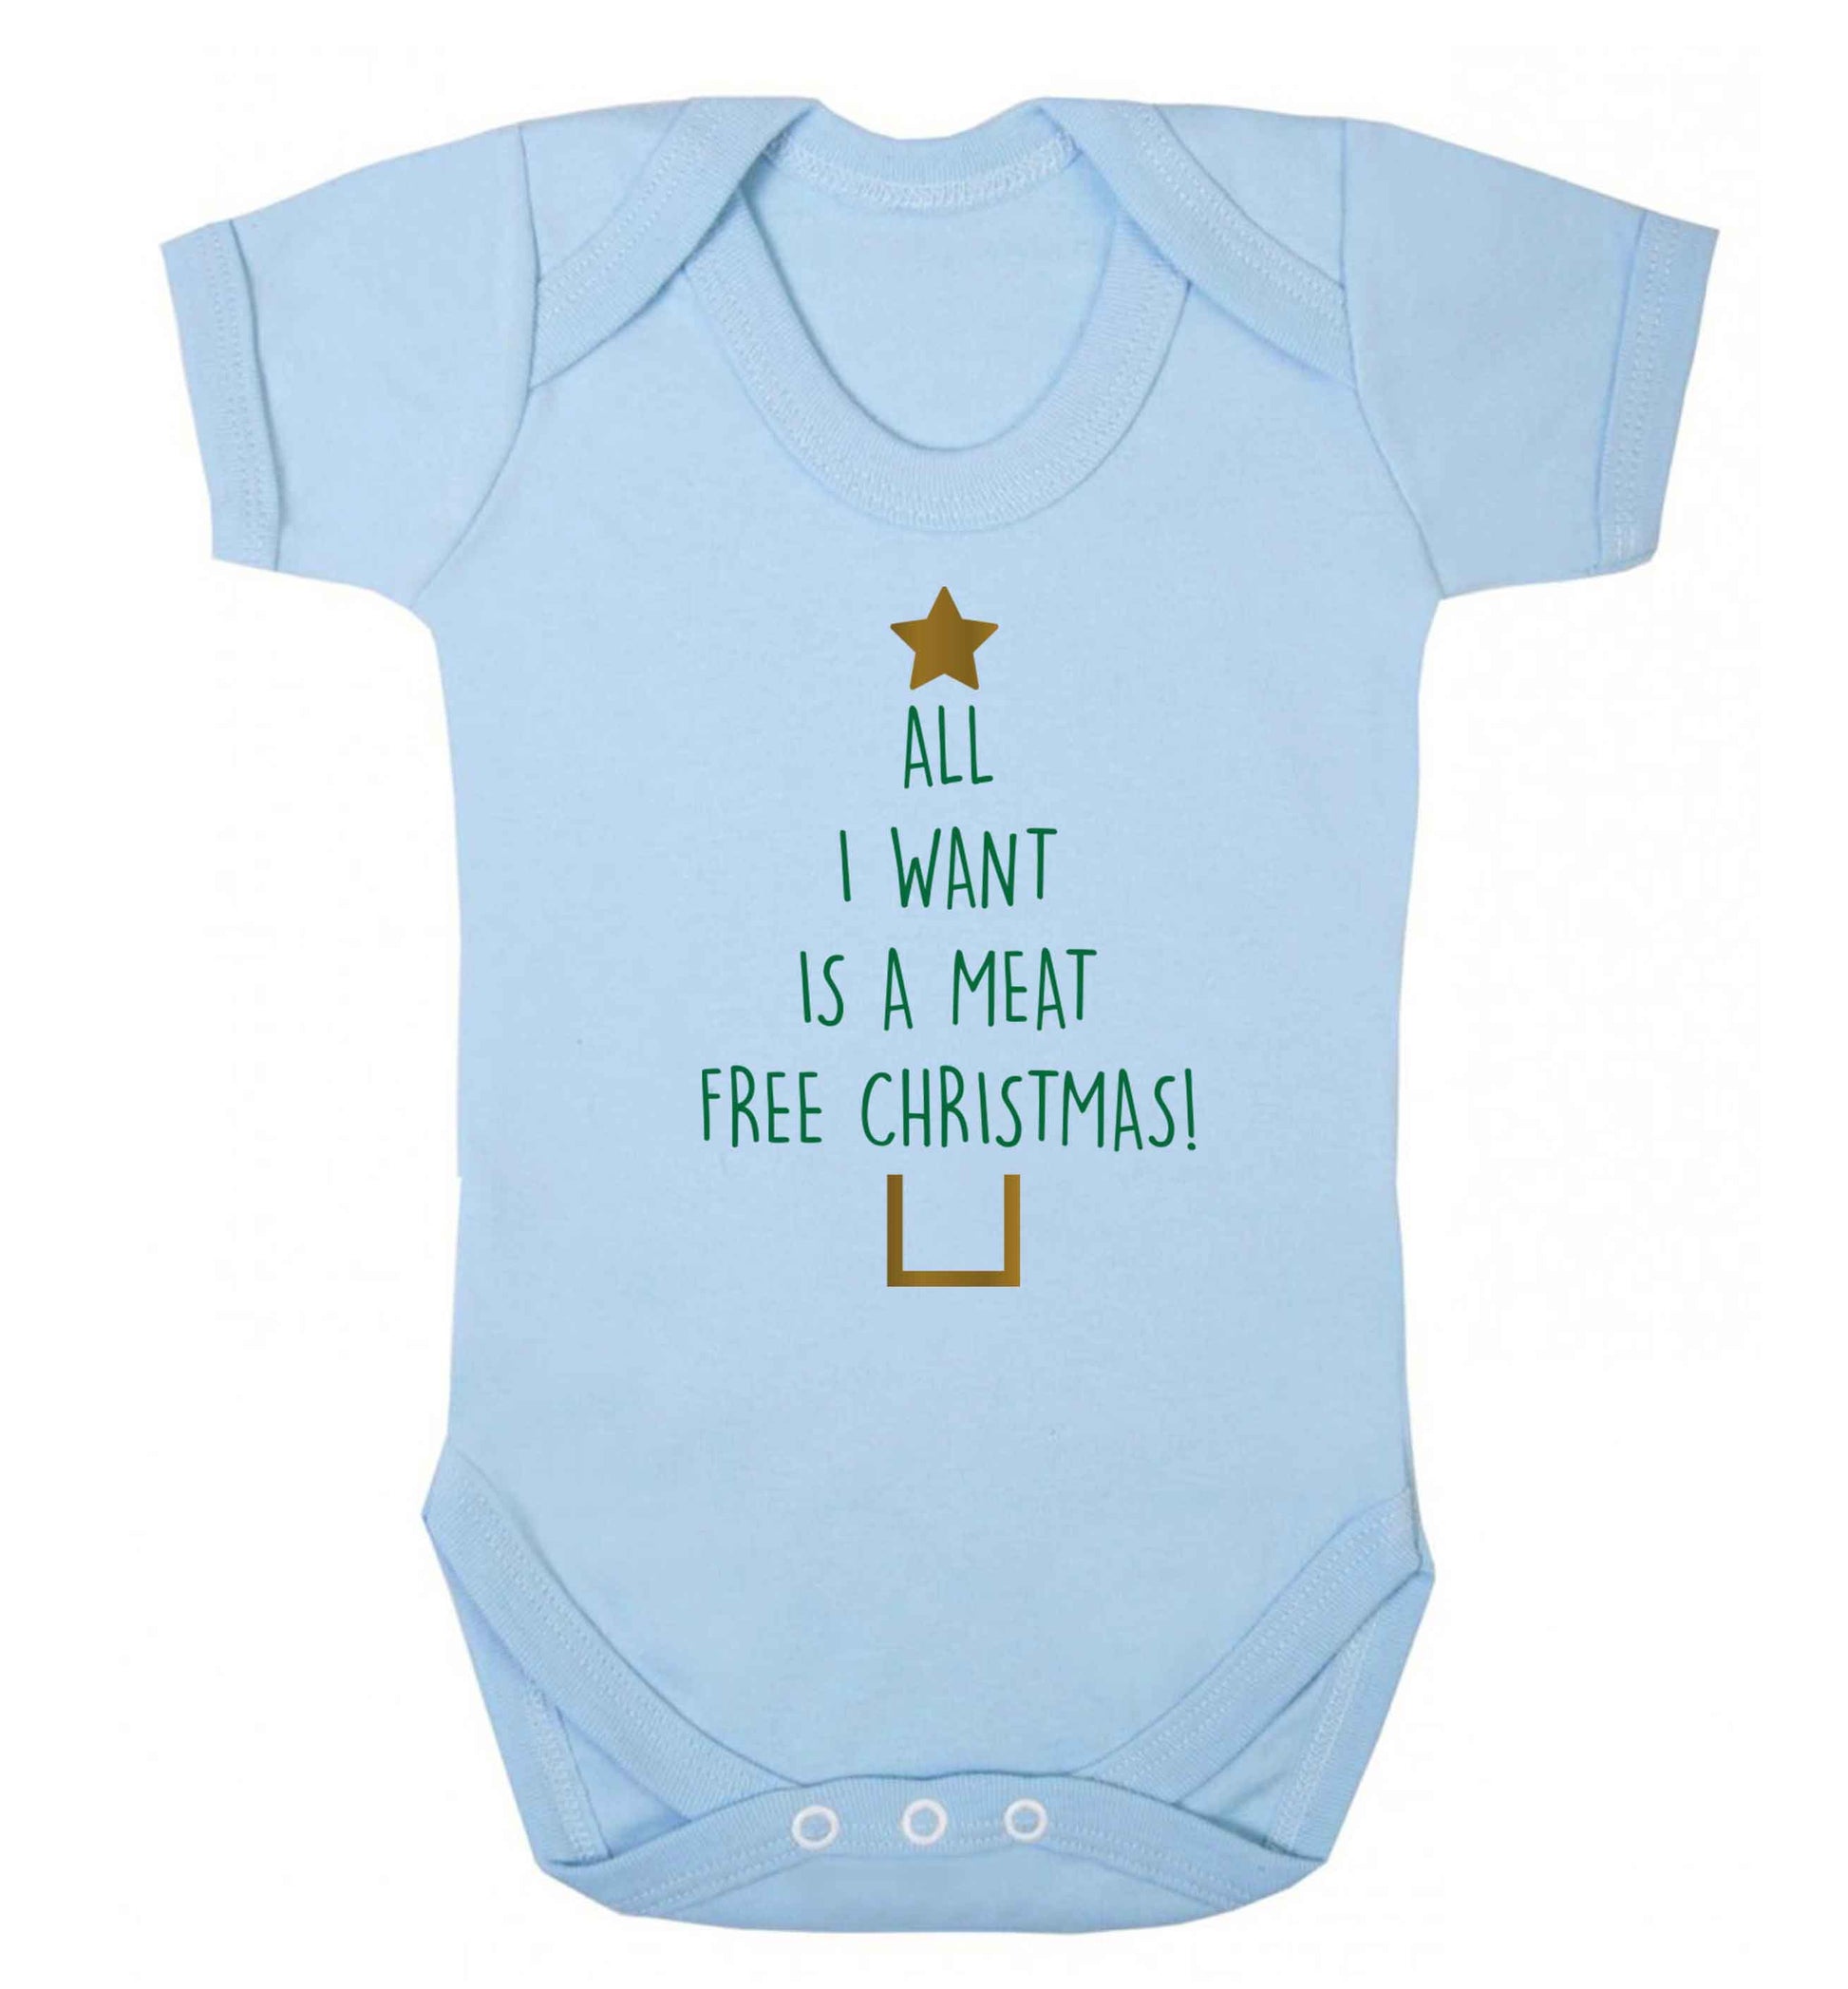 All I want is a meat free Christmas Baby Vest pale blue 18-24 months